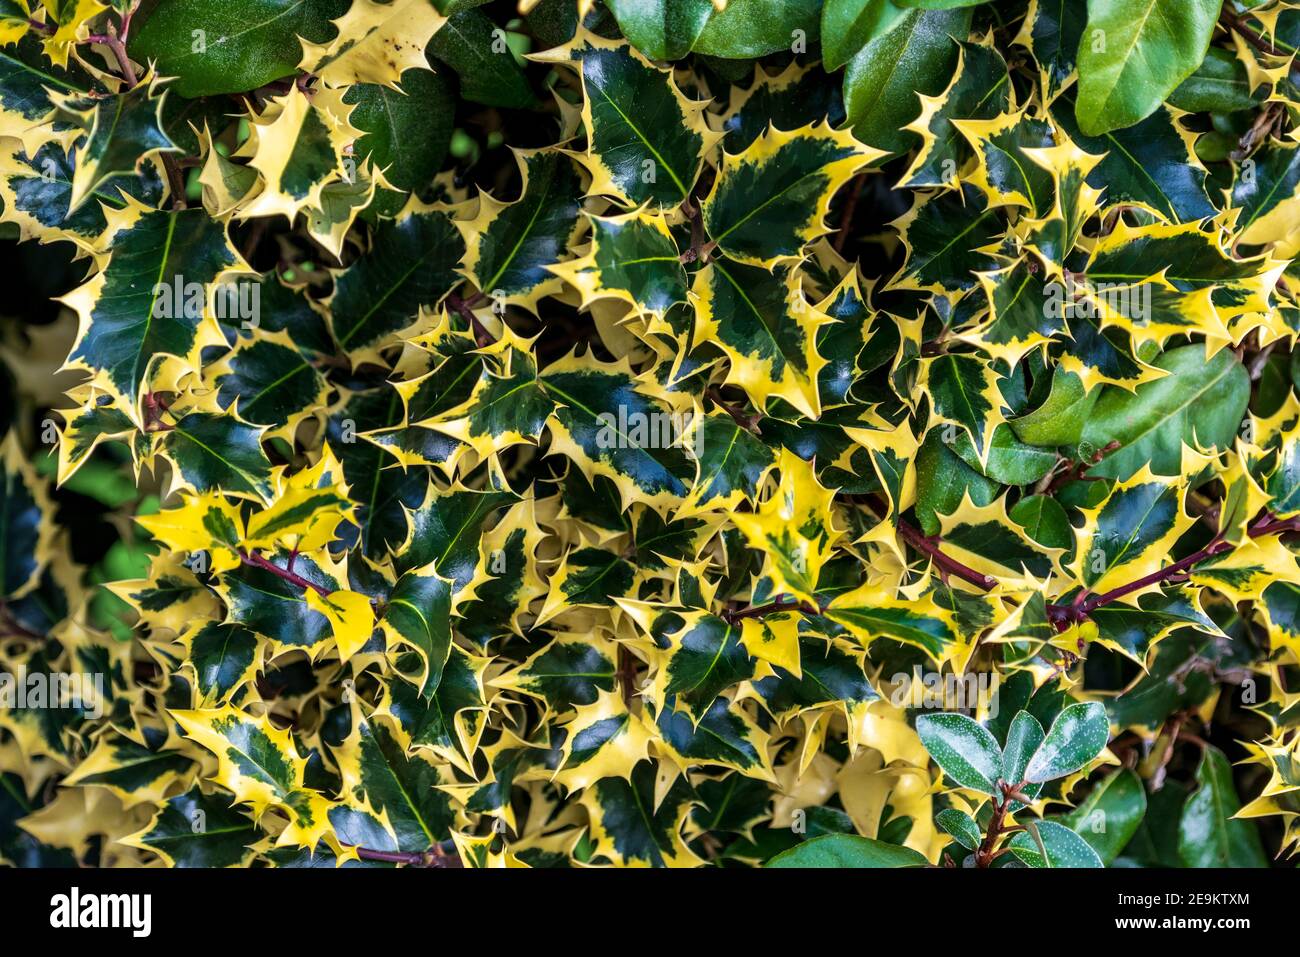 Variegated holly bush green and yellow leaves. Stock Photo